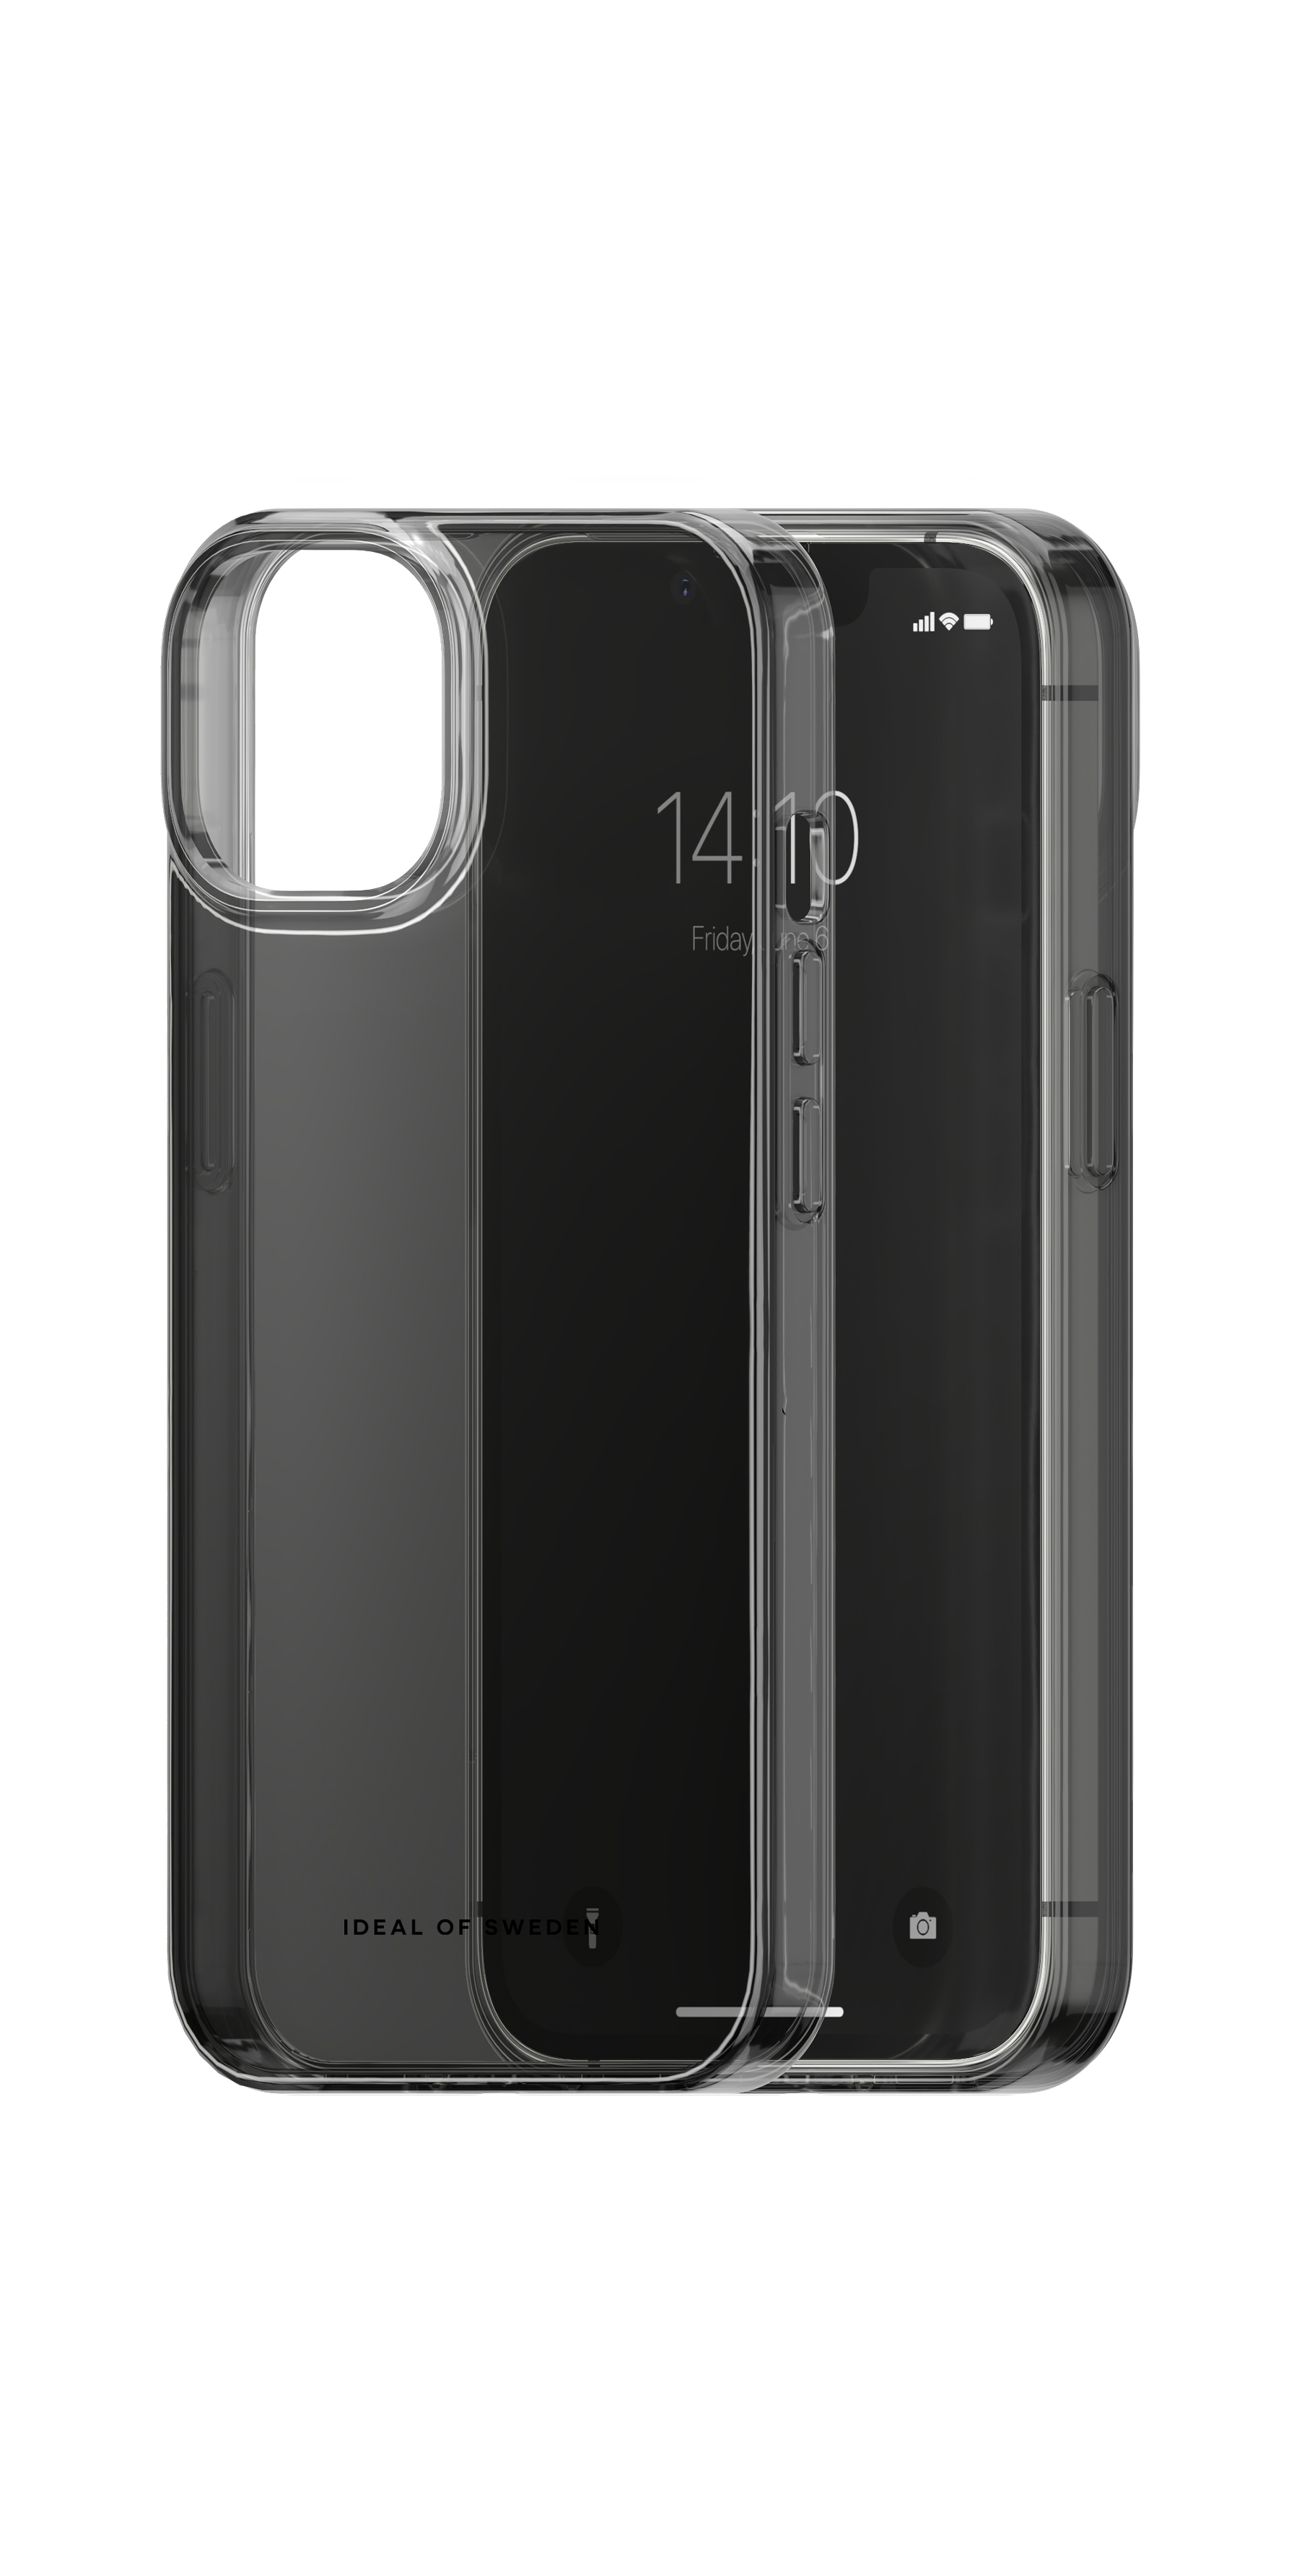 IDEAL Tinted Backcover, 14/13, SWEDEN Clear iPhone Case, OF Black Apple,